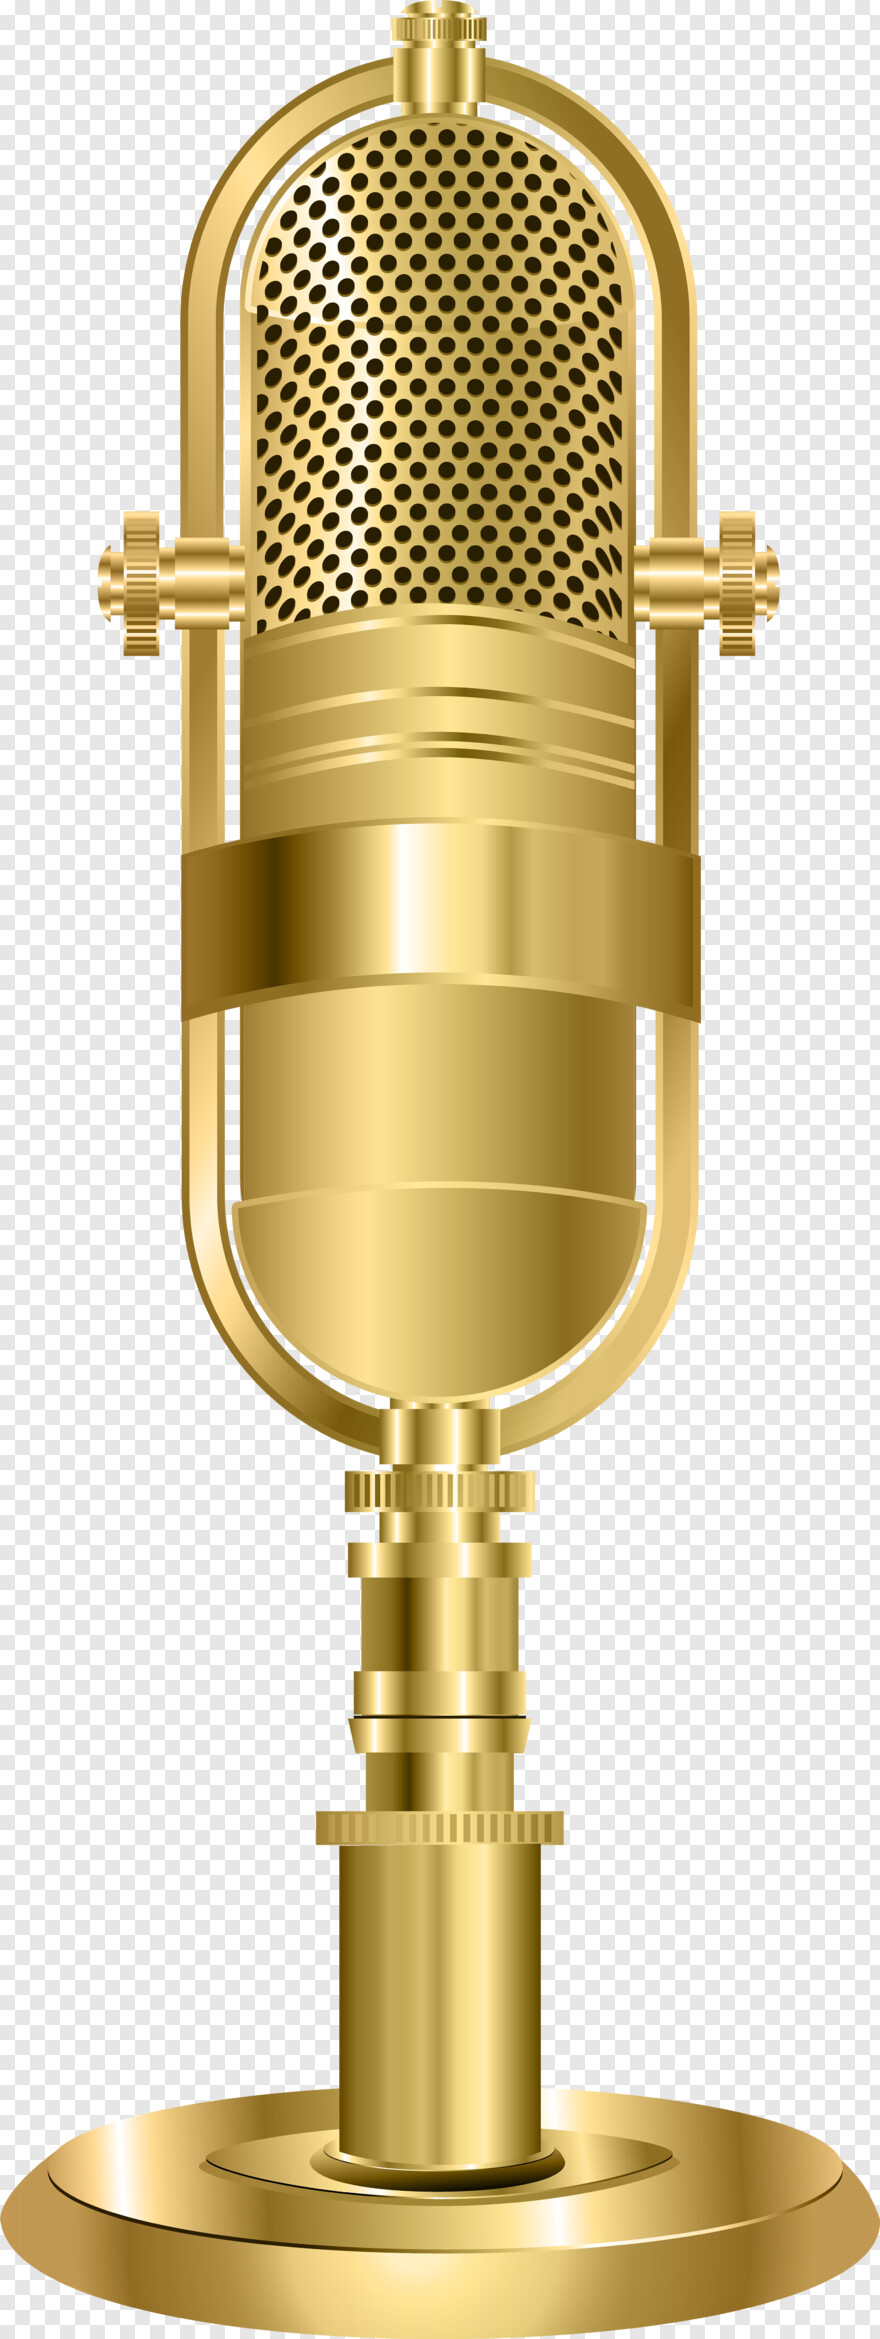 microphone-icon # 791201